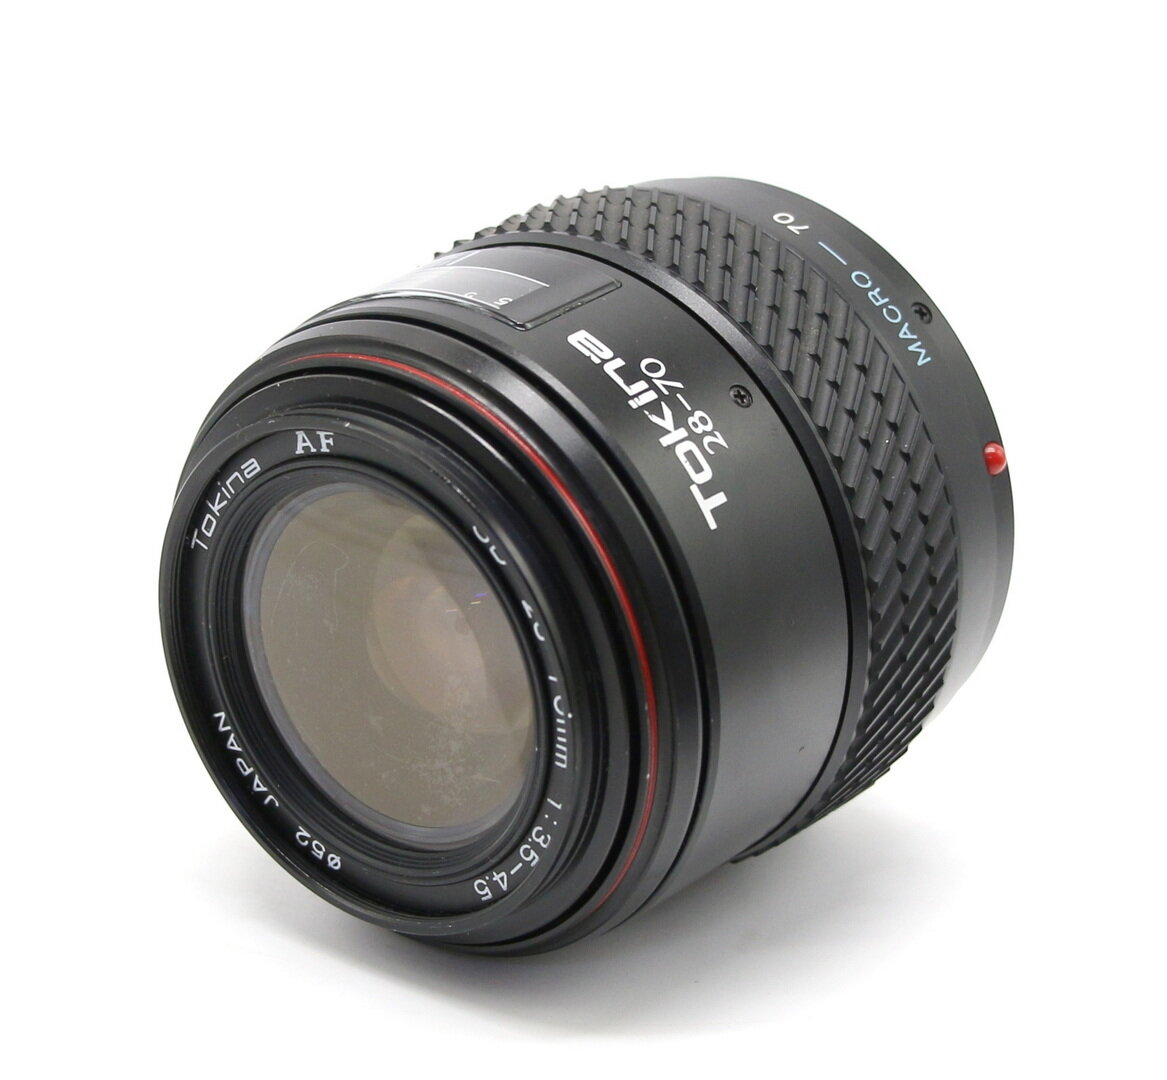 Tokina SD AF 28-70mm f/3.5-4.5 for Sony A